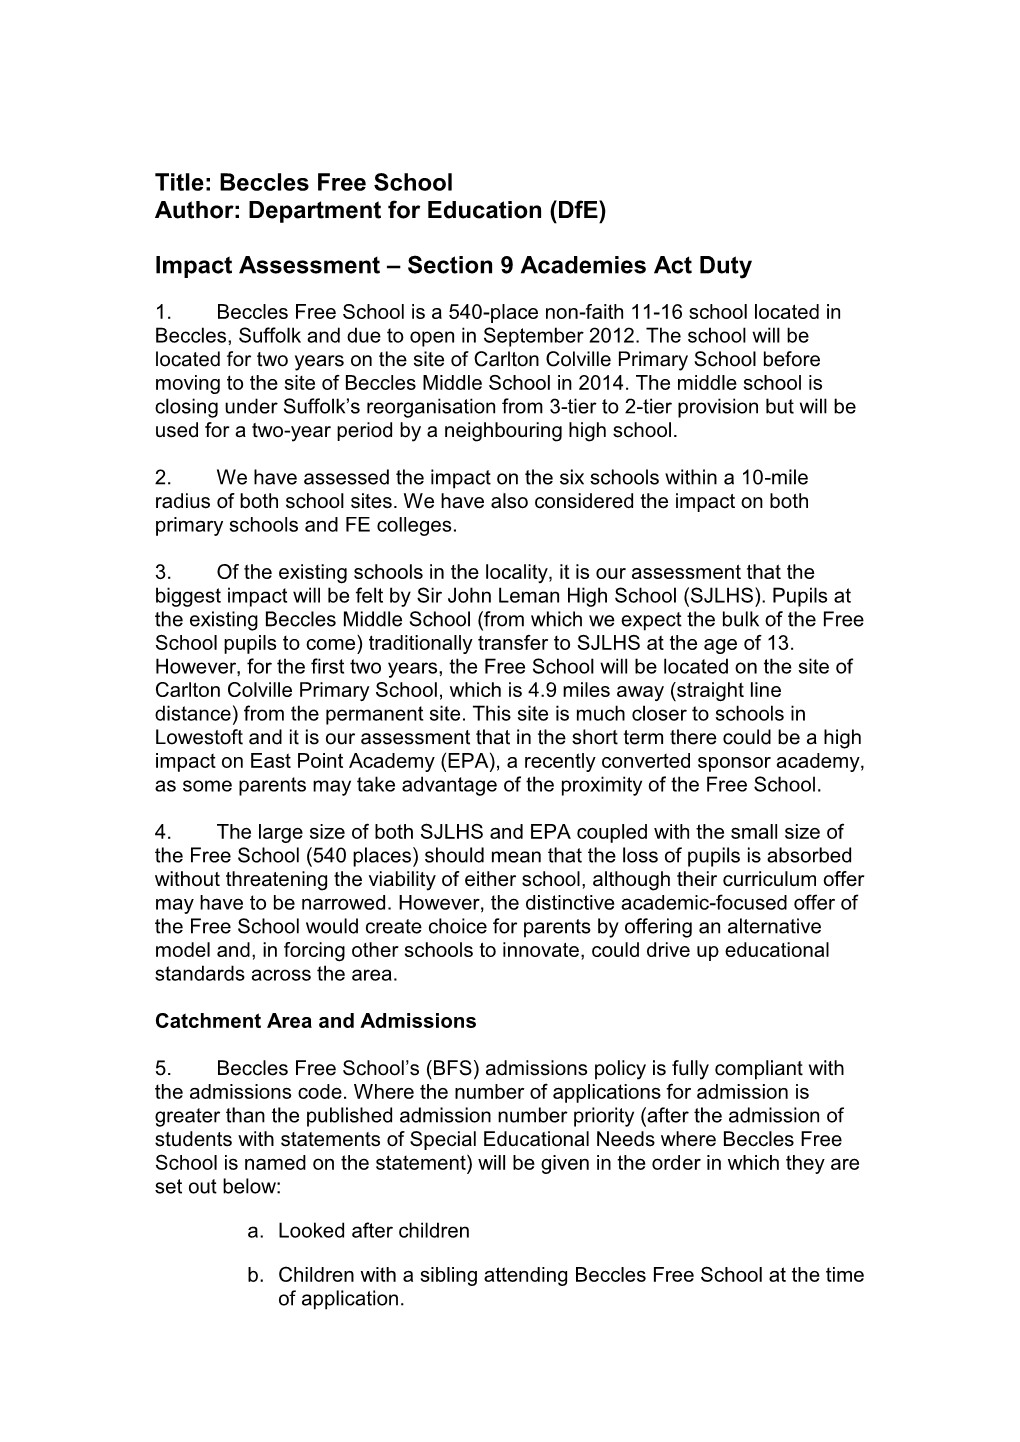 Beccles Free School: Impact Assessment